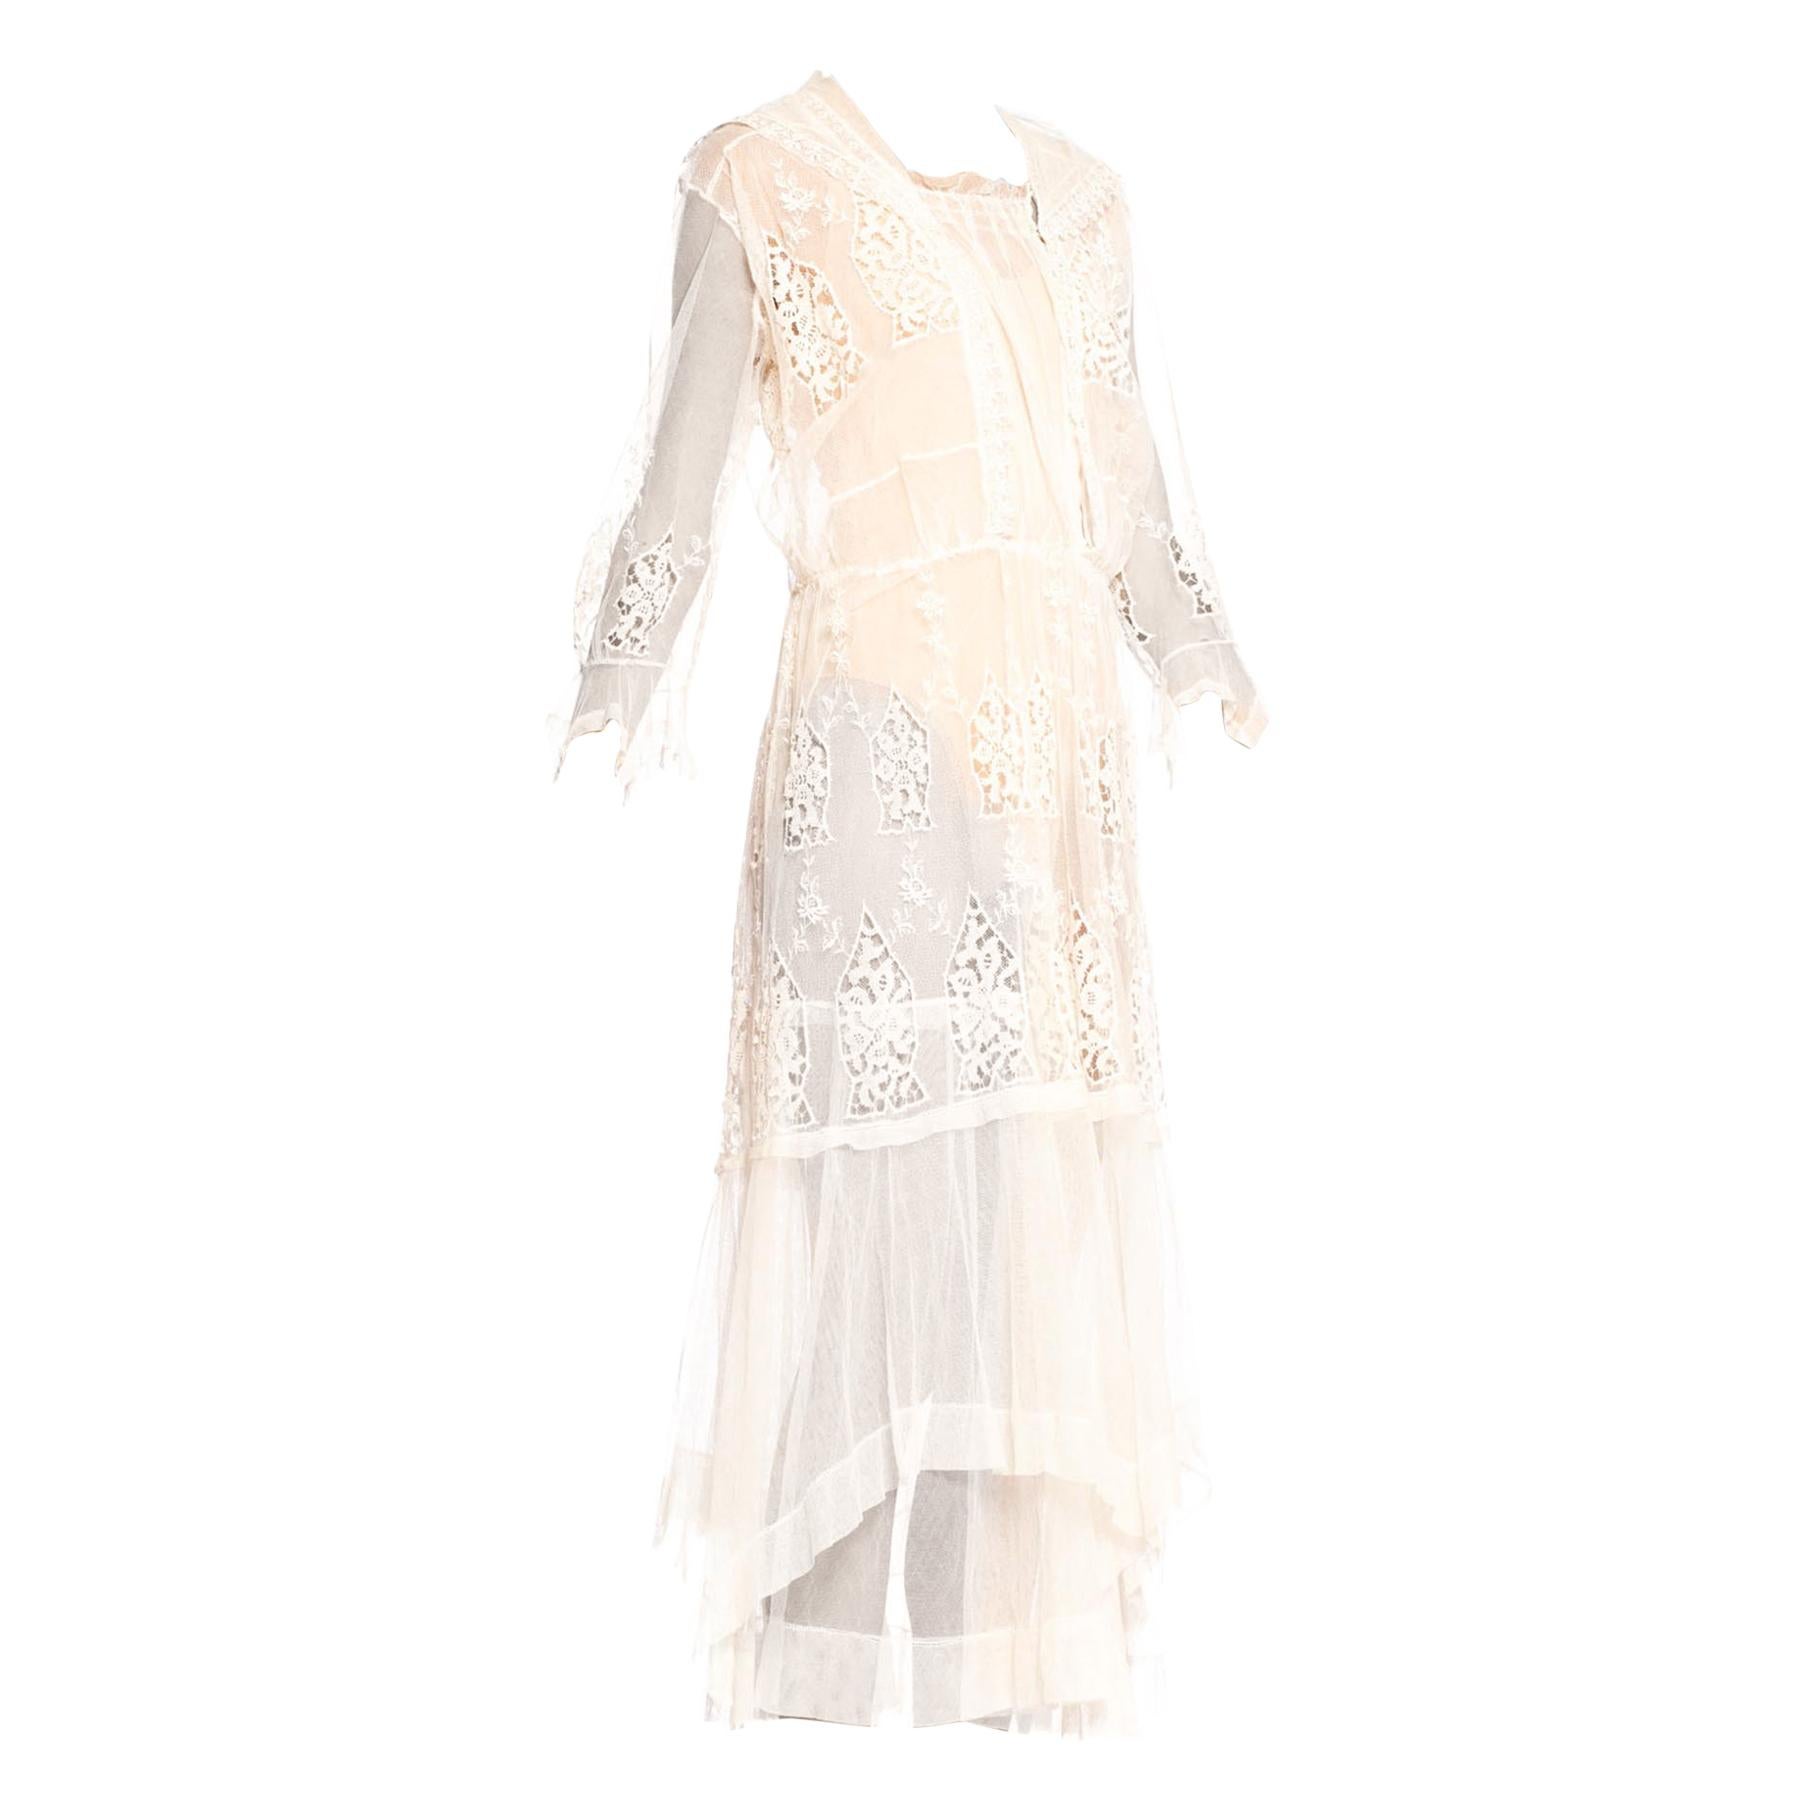 Edwardian Cream Organic Cotton Embroidered Tulle & Lace Dress With Sheer Sleeves